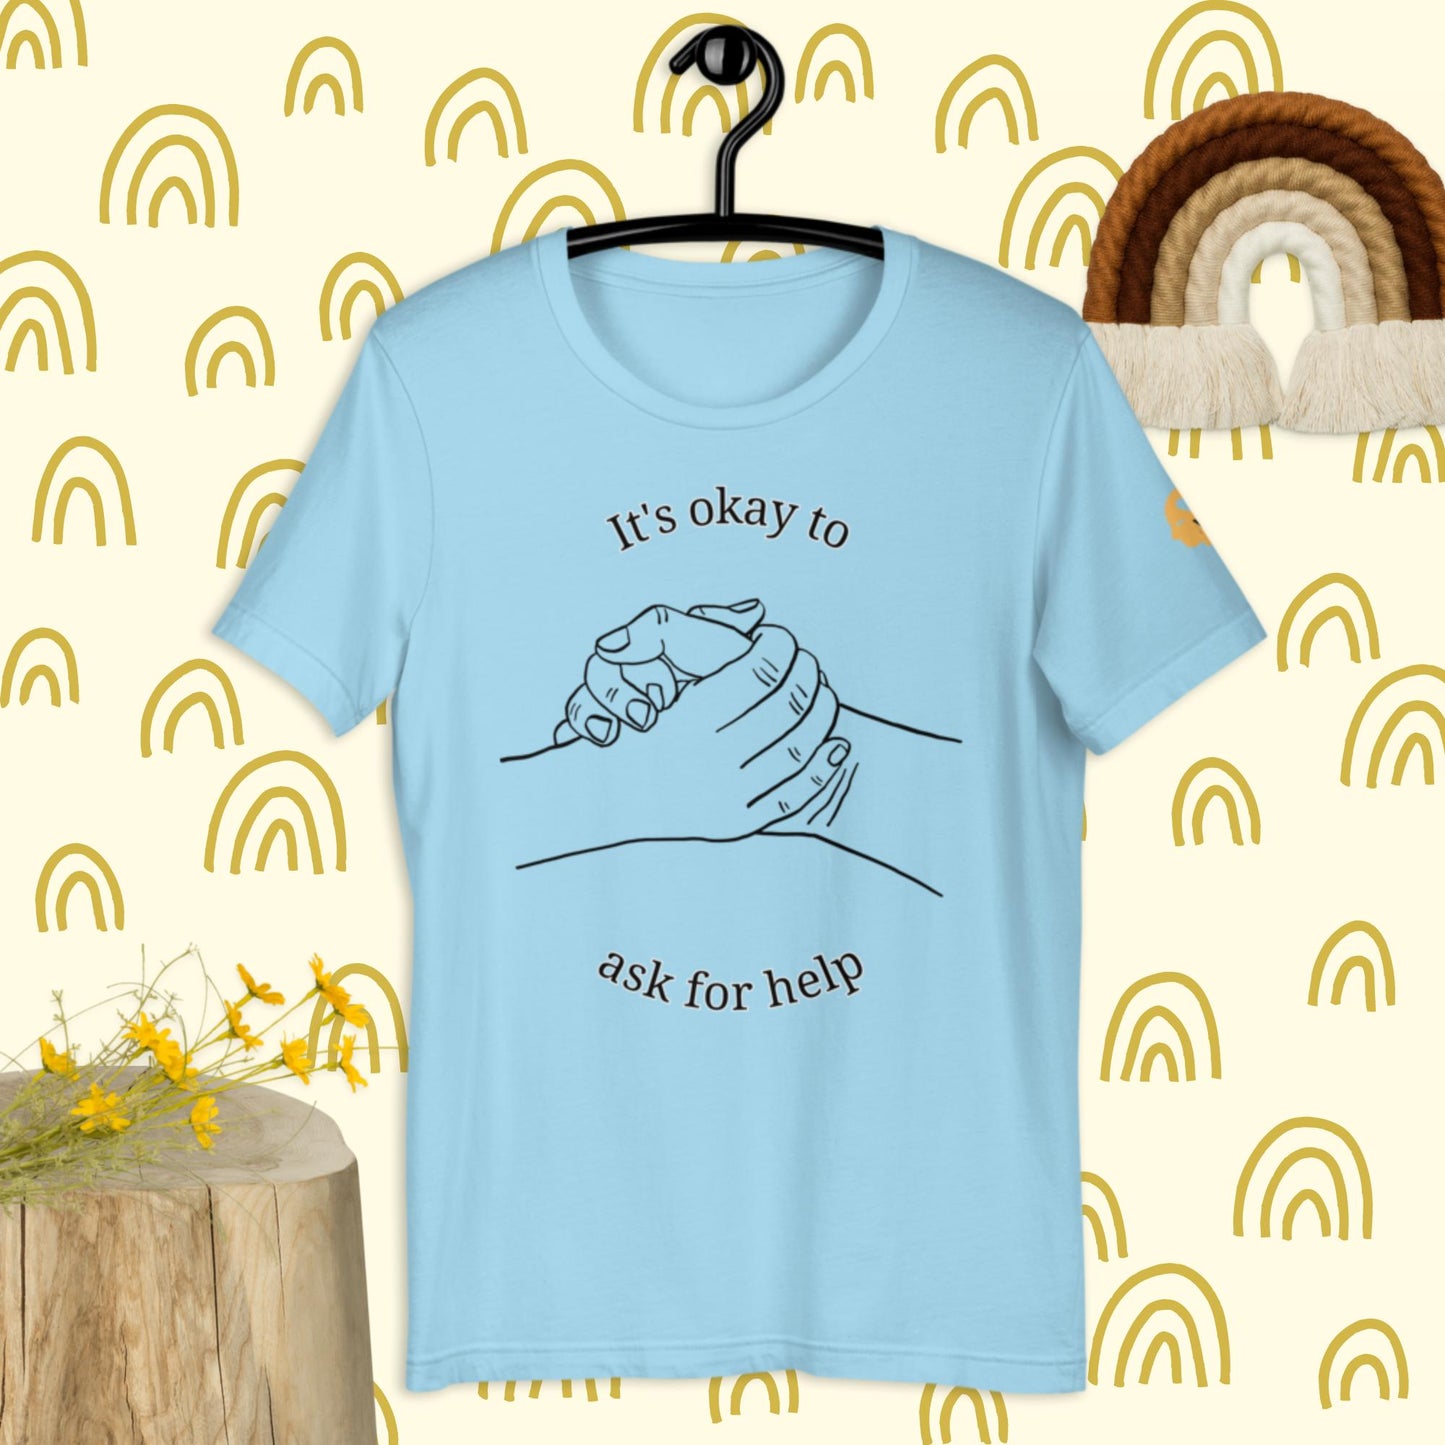 It's okay to ask for help t-shirt